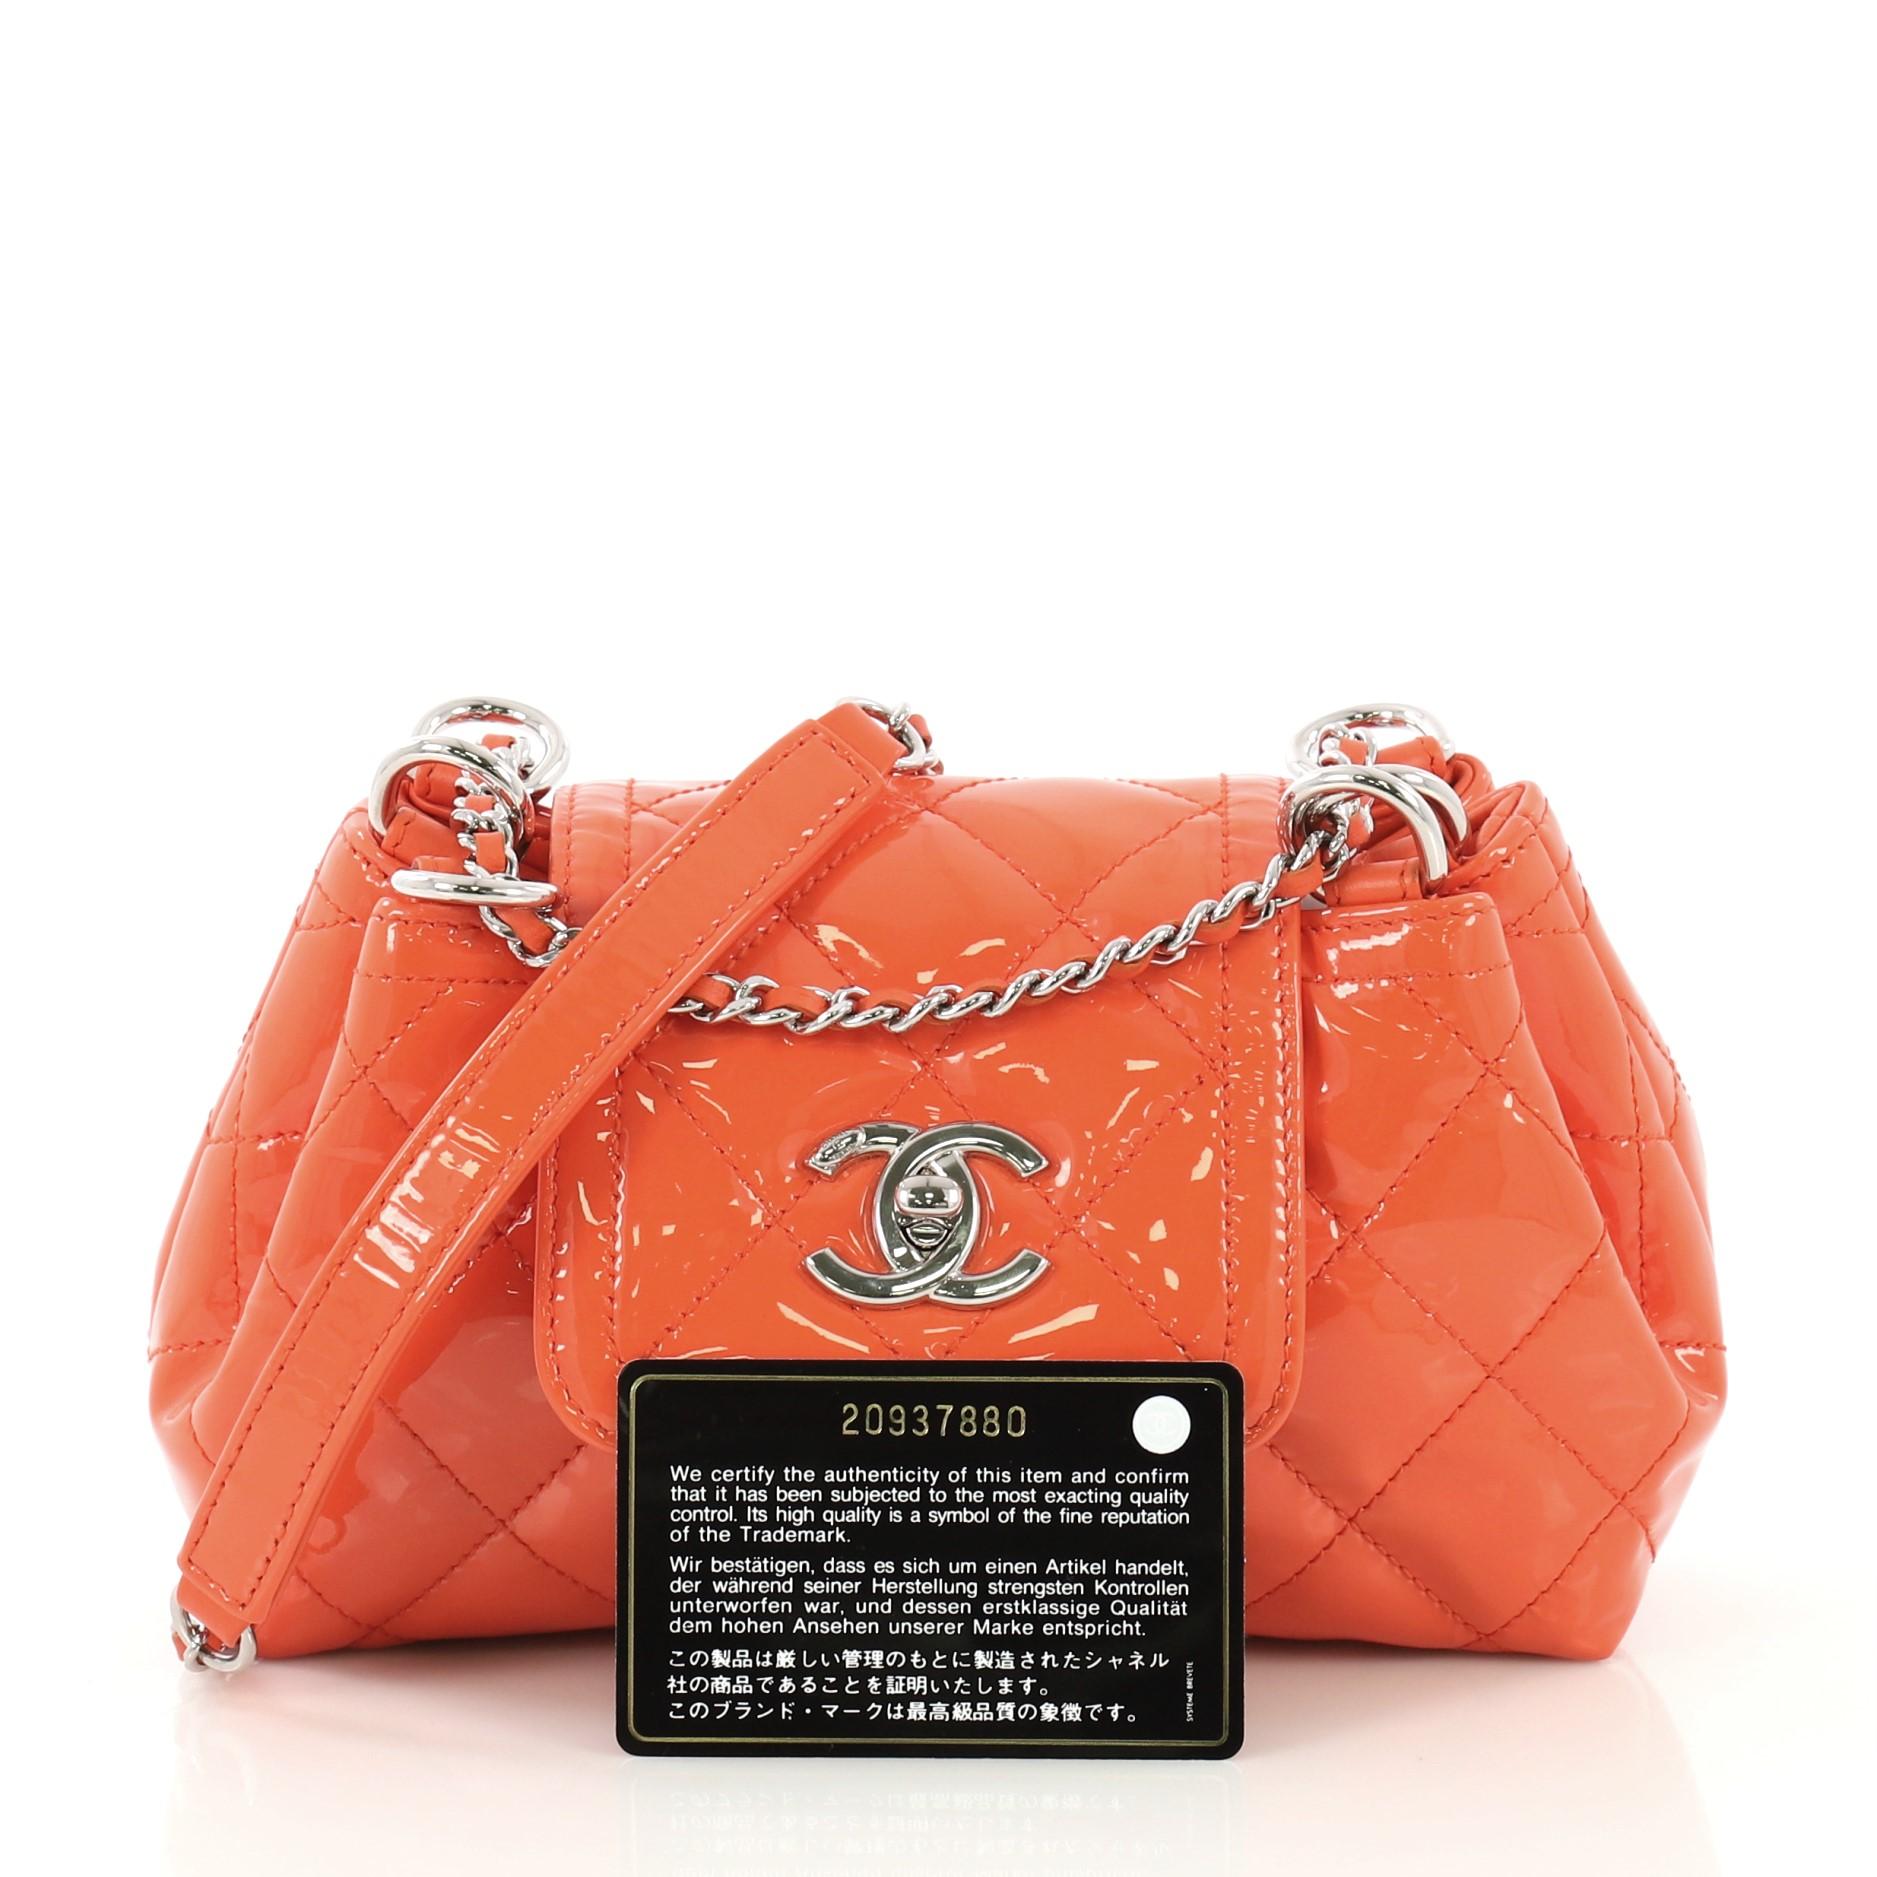 This Chanel Coco Shine Accordion Flap Bag Quilted Patent Mini, crafted from orange quilted patent leather, features woven-in leather chain strap with leather pad, frontal flap, and silver-tone hardware. Its CC turn-lock closure opens to a black